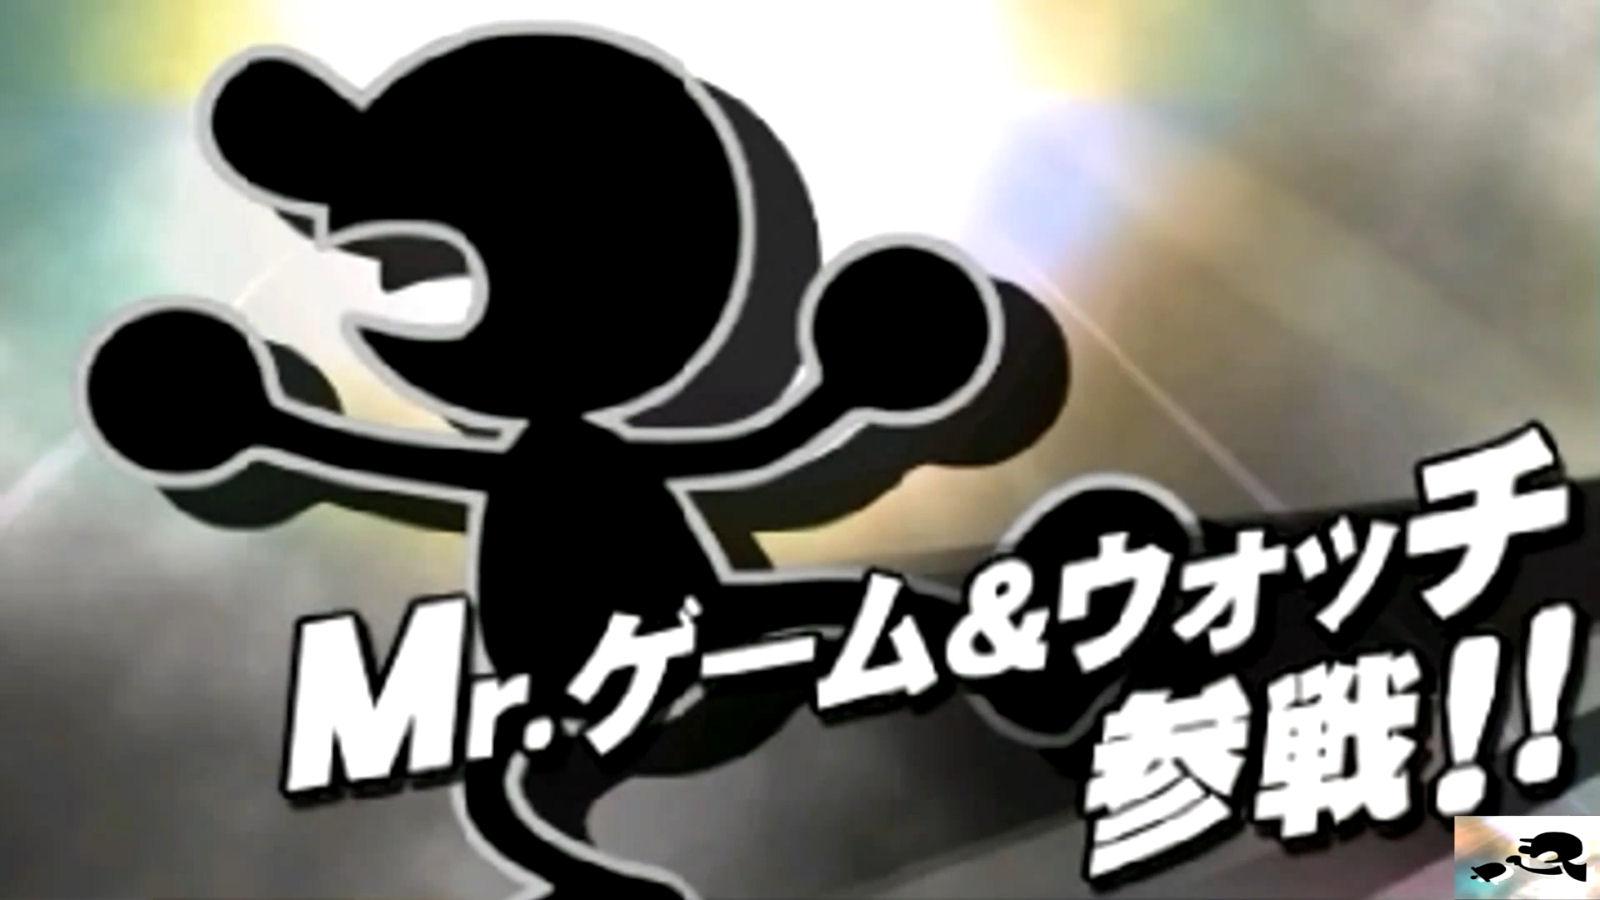 Download Unlock Mr Game And Watch In Super Smash Bros free software